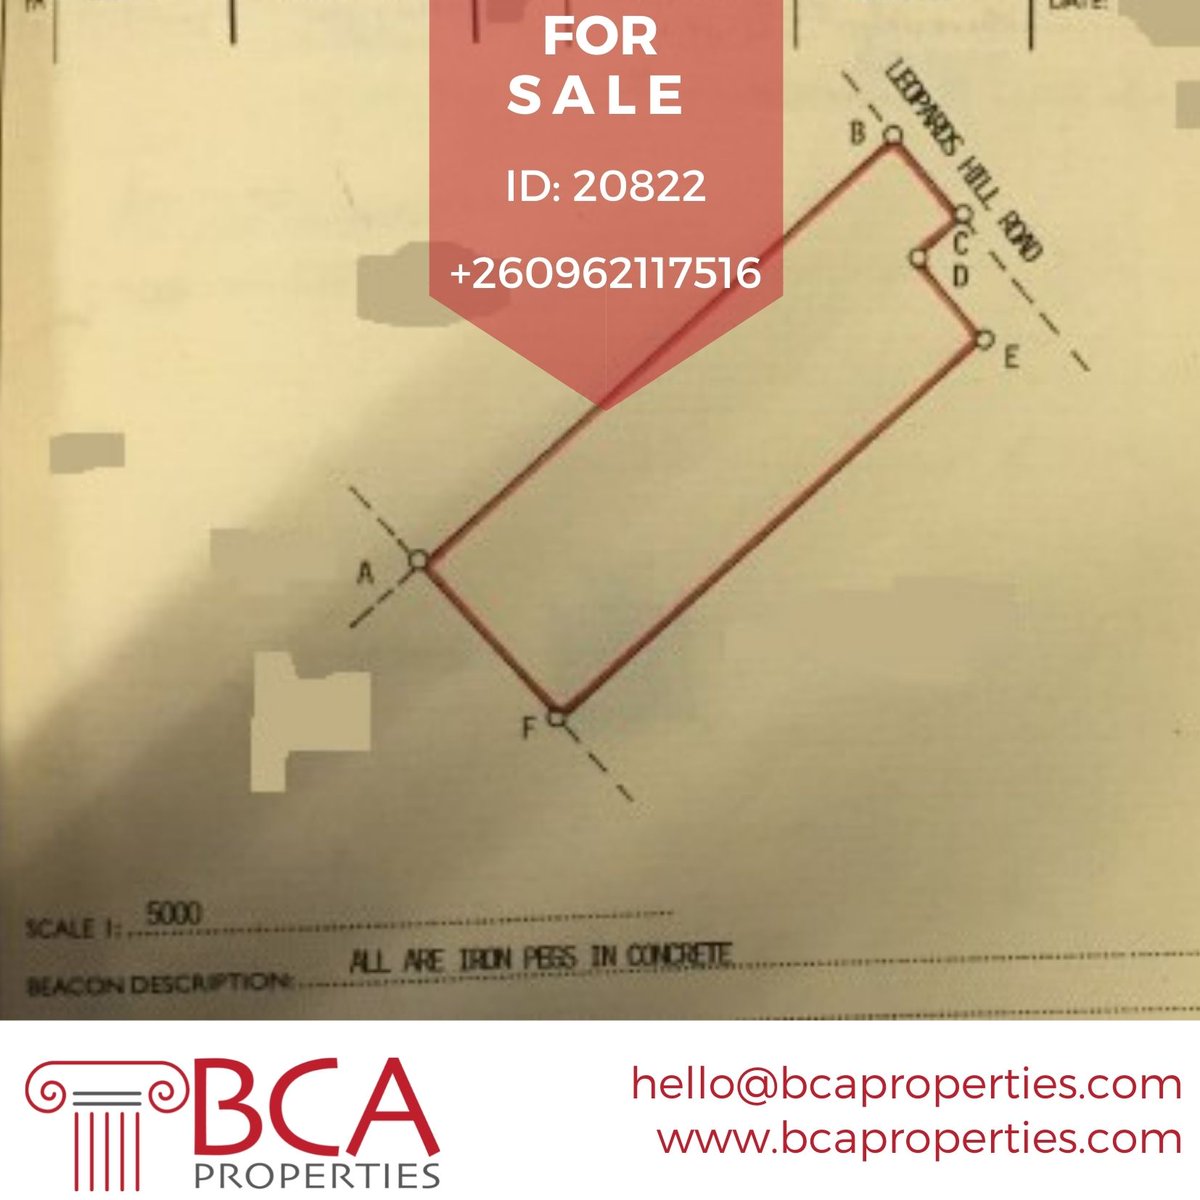 Prime land for sale on Leopards Hill Road perfectly suited for upmarket property developments.
Click to See more 👉: bcaproperties.com/property/prime…
#bcaproperties #lusaka #Zambia #property #realestate #PricedToSell #OpenForOffers #PrimeRealEstate #landdevelopers #LeopardsHill